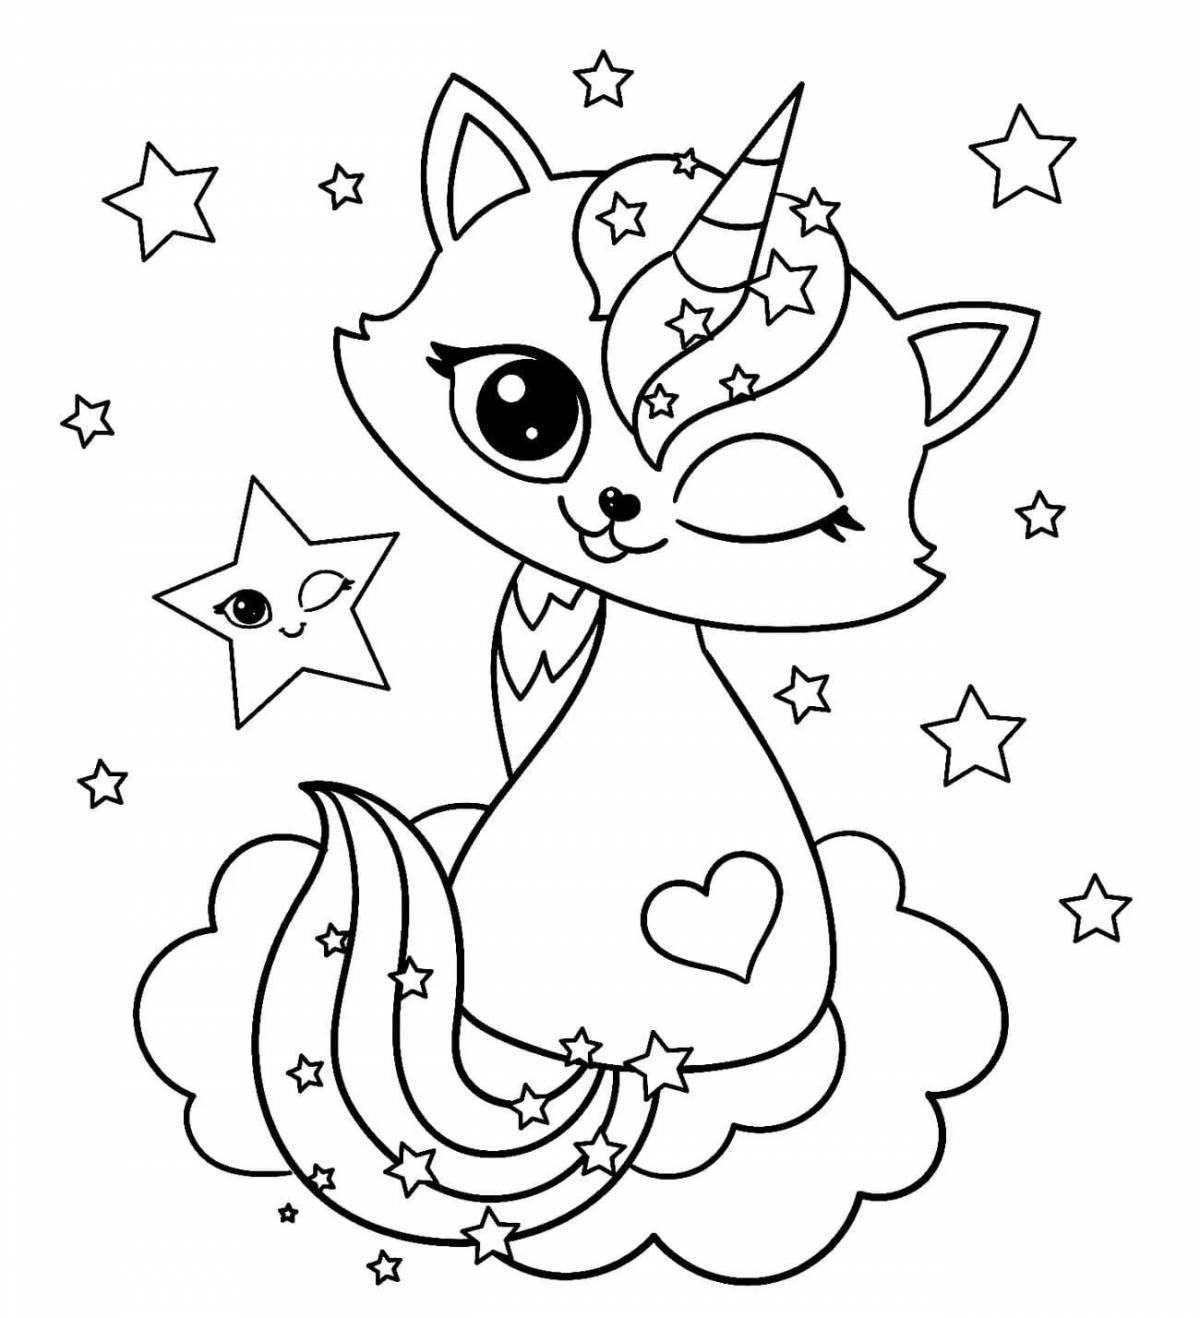 Felicity rainbow cat coloring page